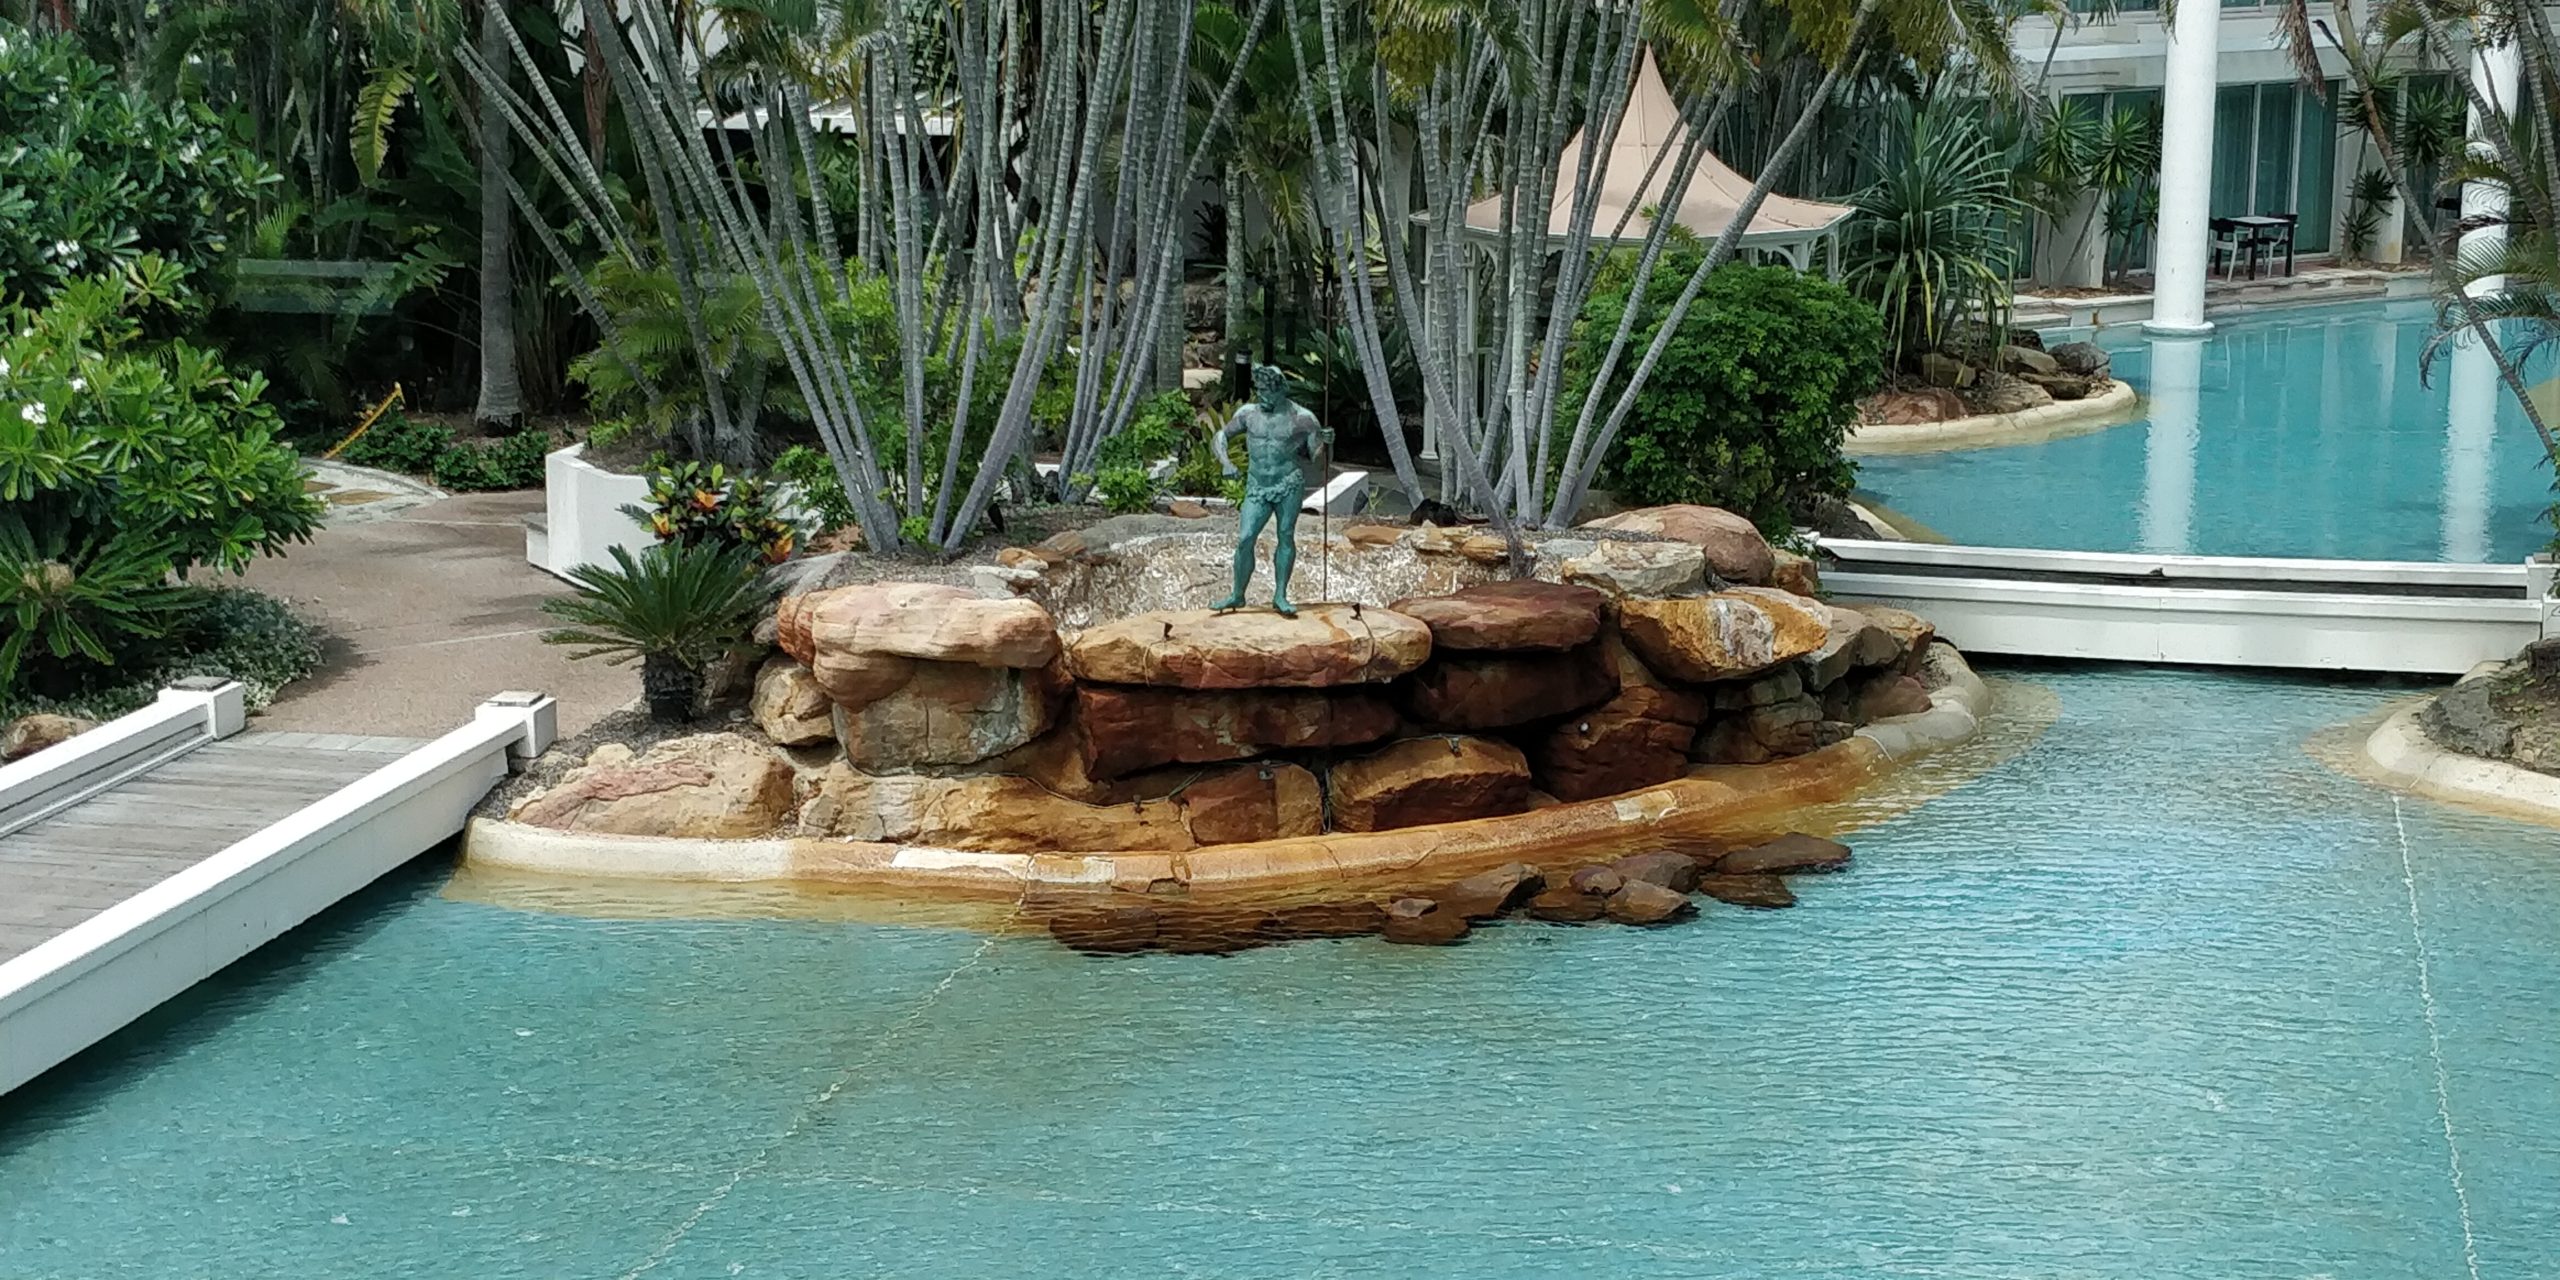 Review the Grand Mirage Resort picture of a statue of Poseidon in the lagoon